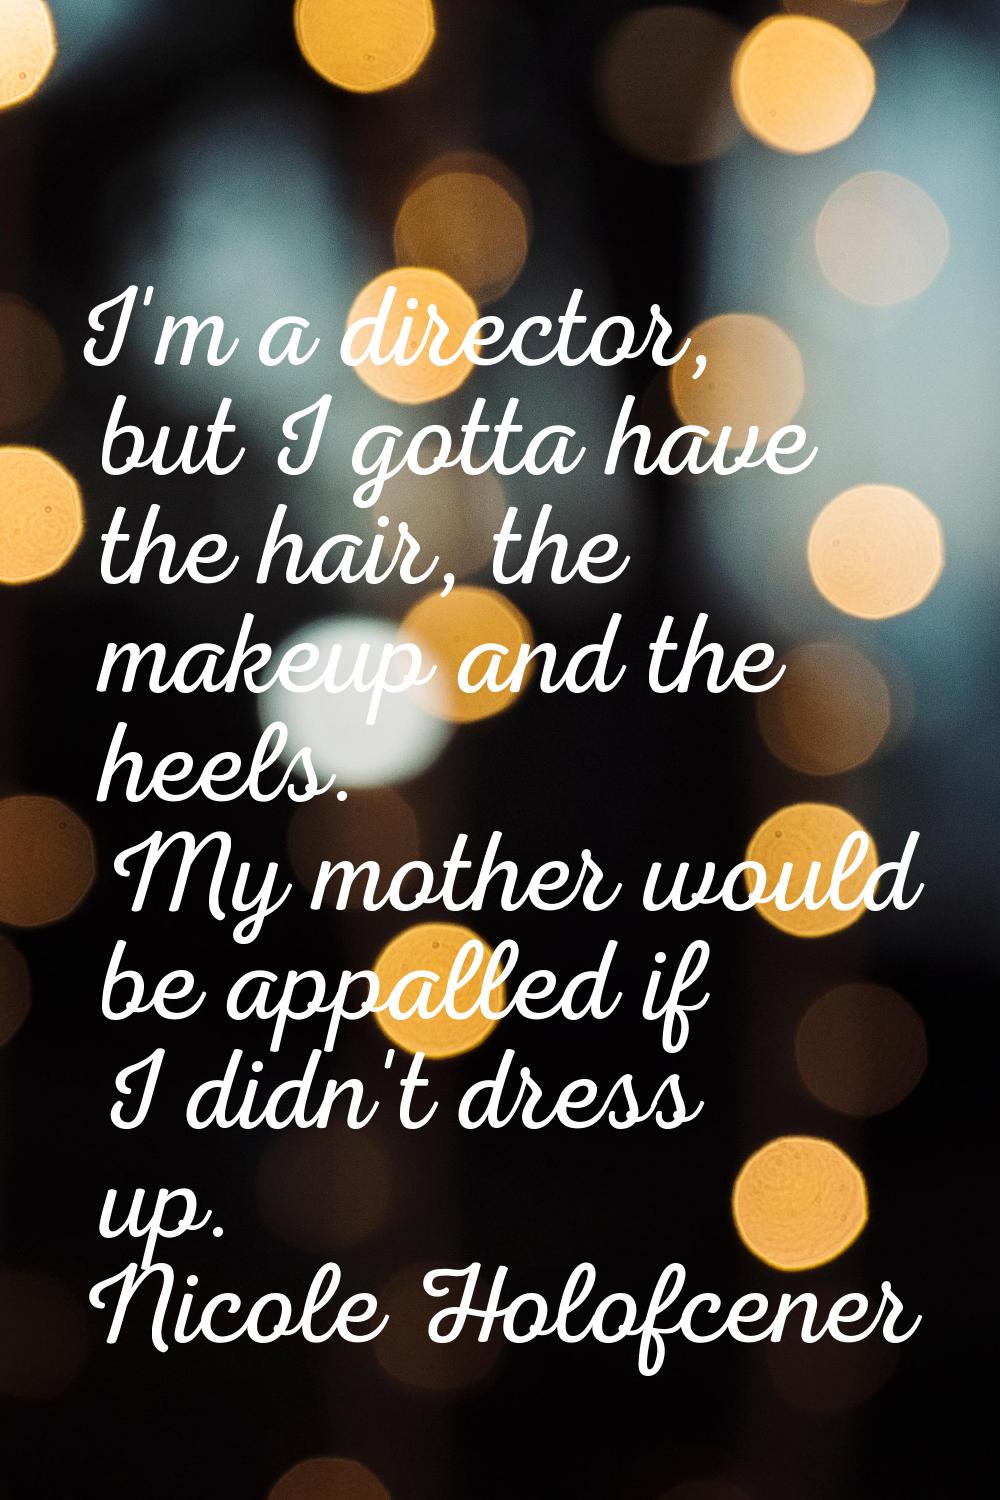 I'm a director, but I gotta have the hair, the makeup and the heels. My mother would be appalled if